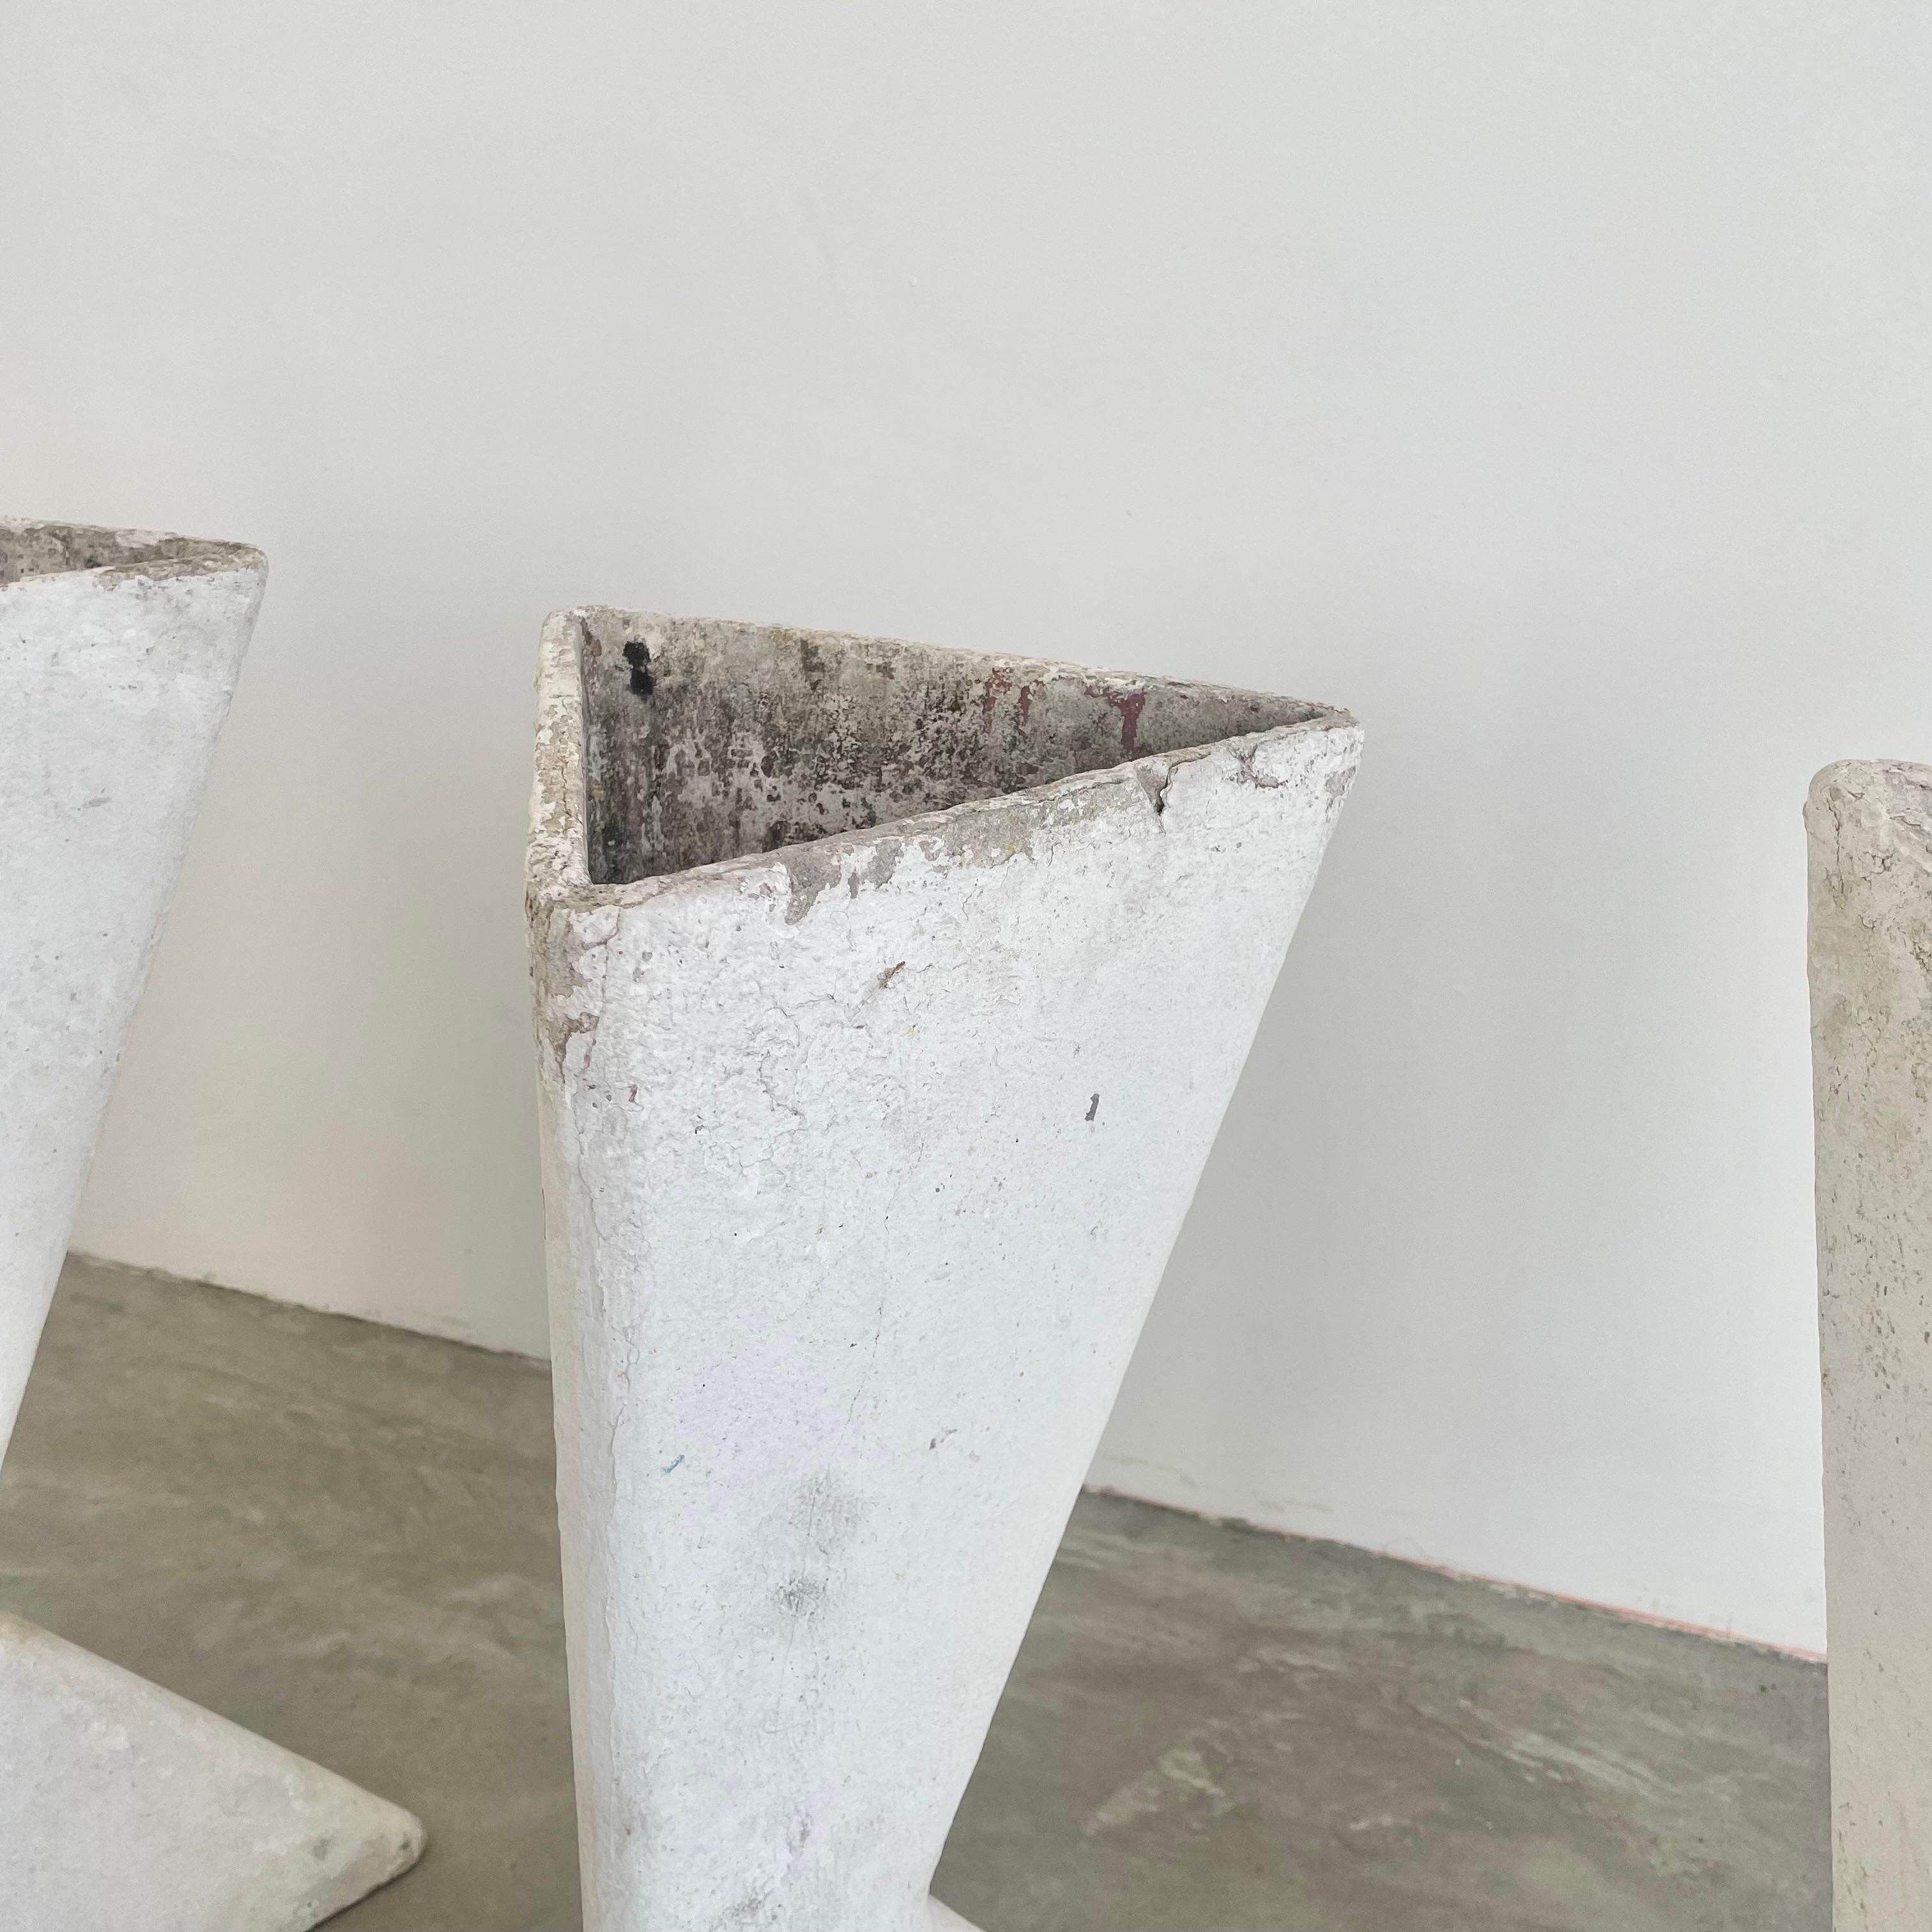 Set of 3 Sculptural Triangular Planters by Willy Guhl, 1960s For Sale 9